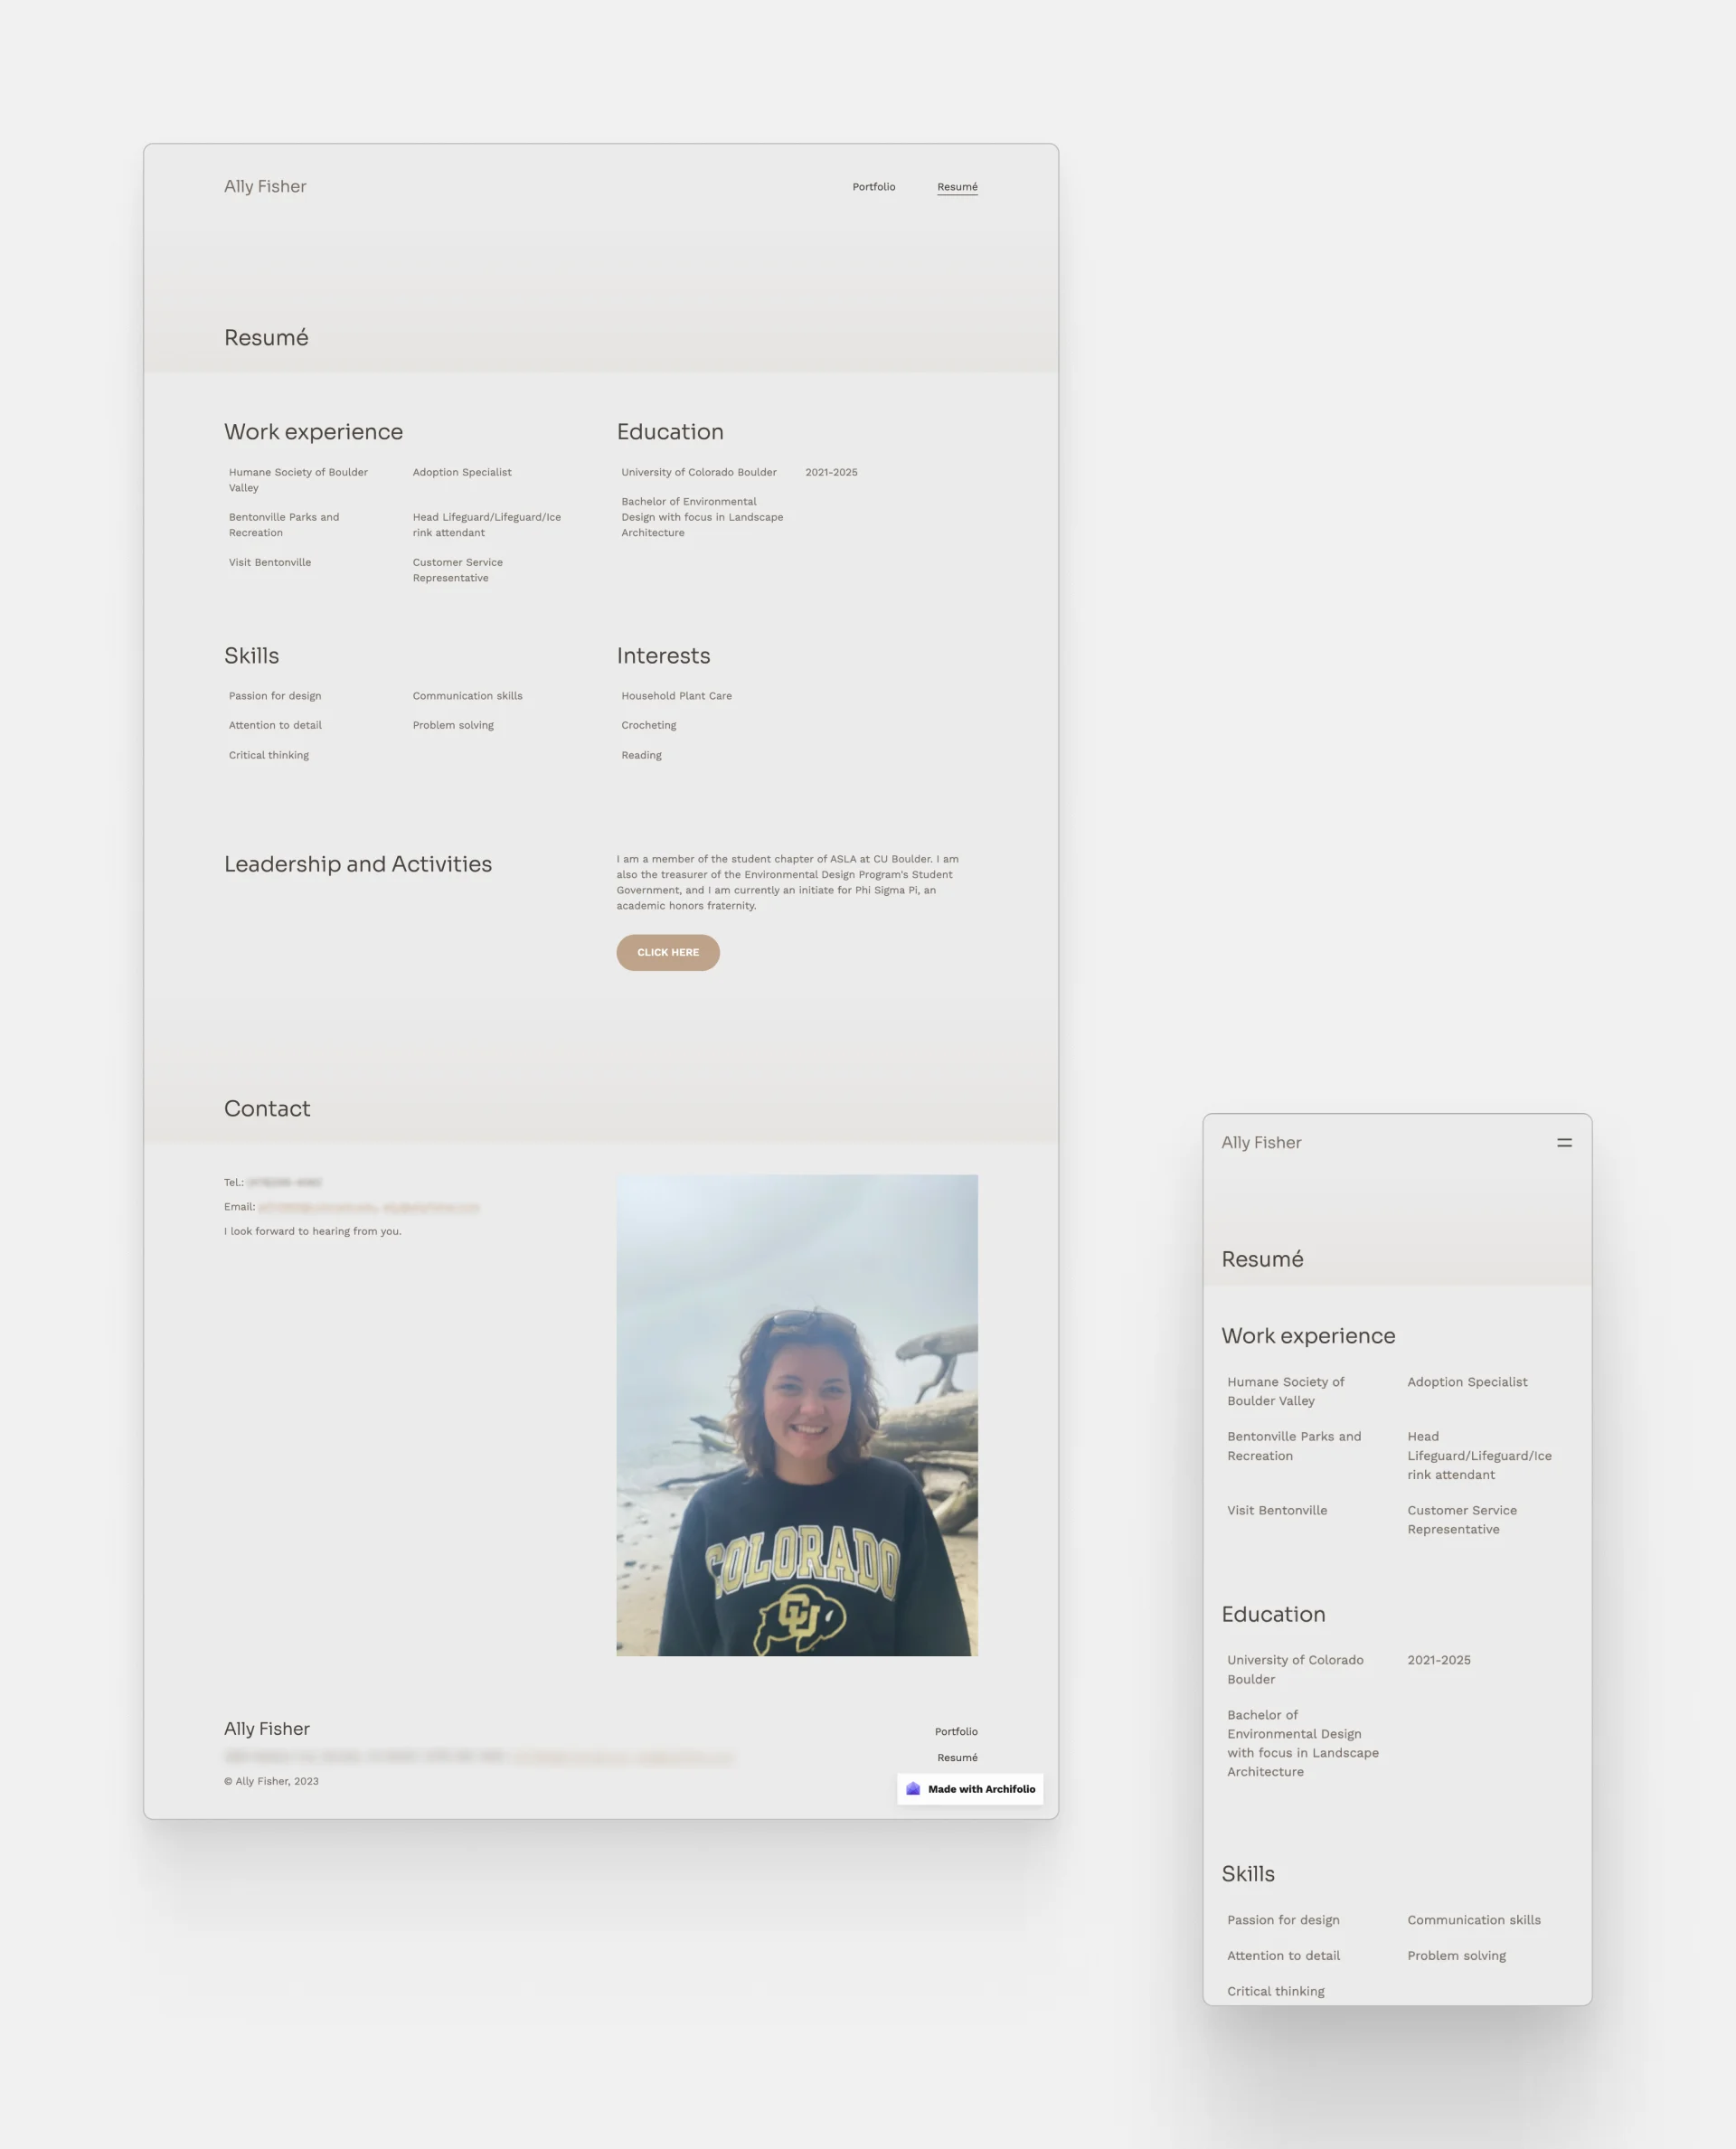 Screenshots of the desktop and mobile view of Ally Fisher's resume in her online portfolio